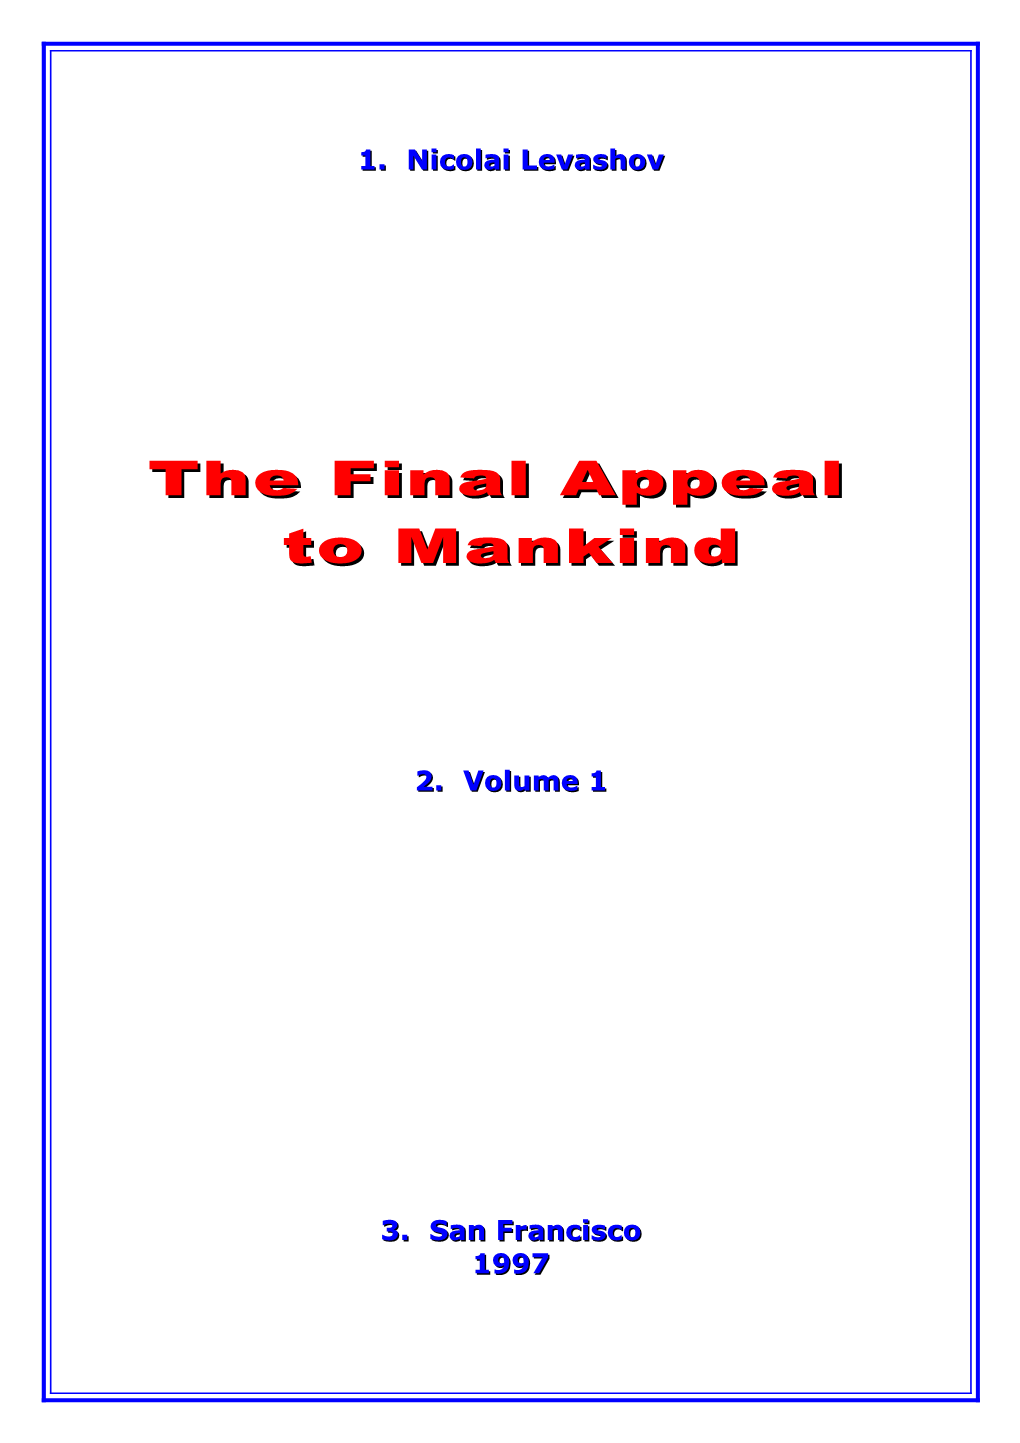 Nicolai Levashov the Final Appeal to Mankind Vol 1